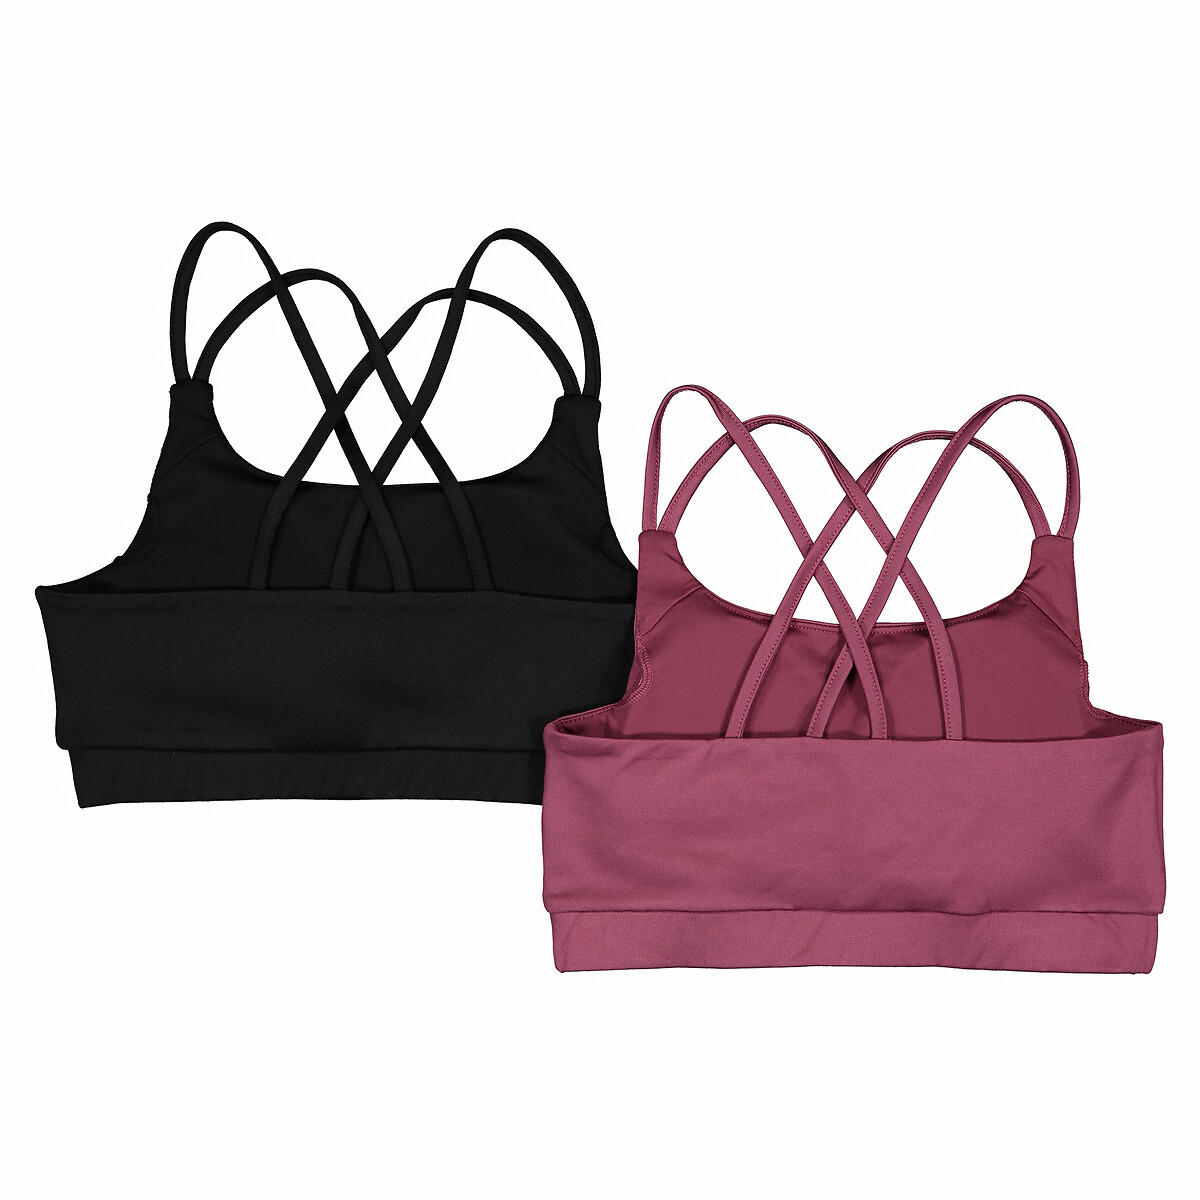 Pack of 2 bralettes, 10-18 years, black + plum, La Redoute Collections